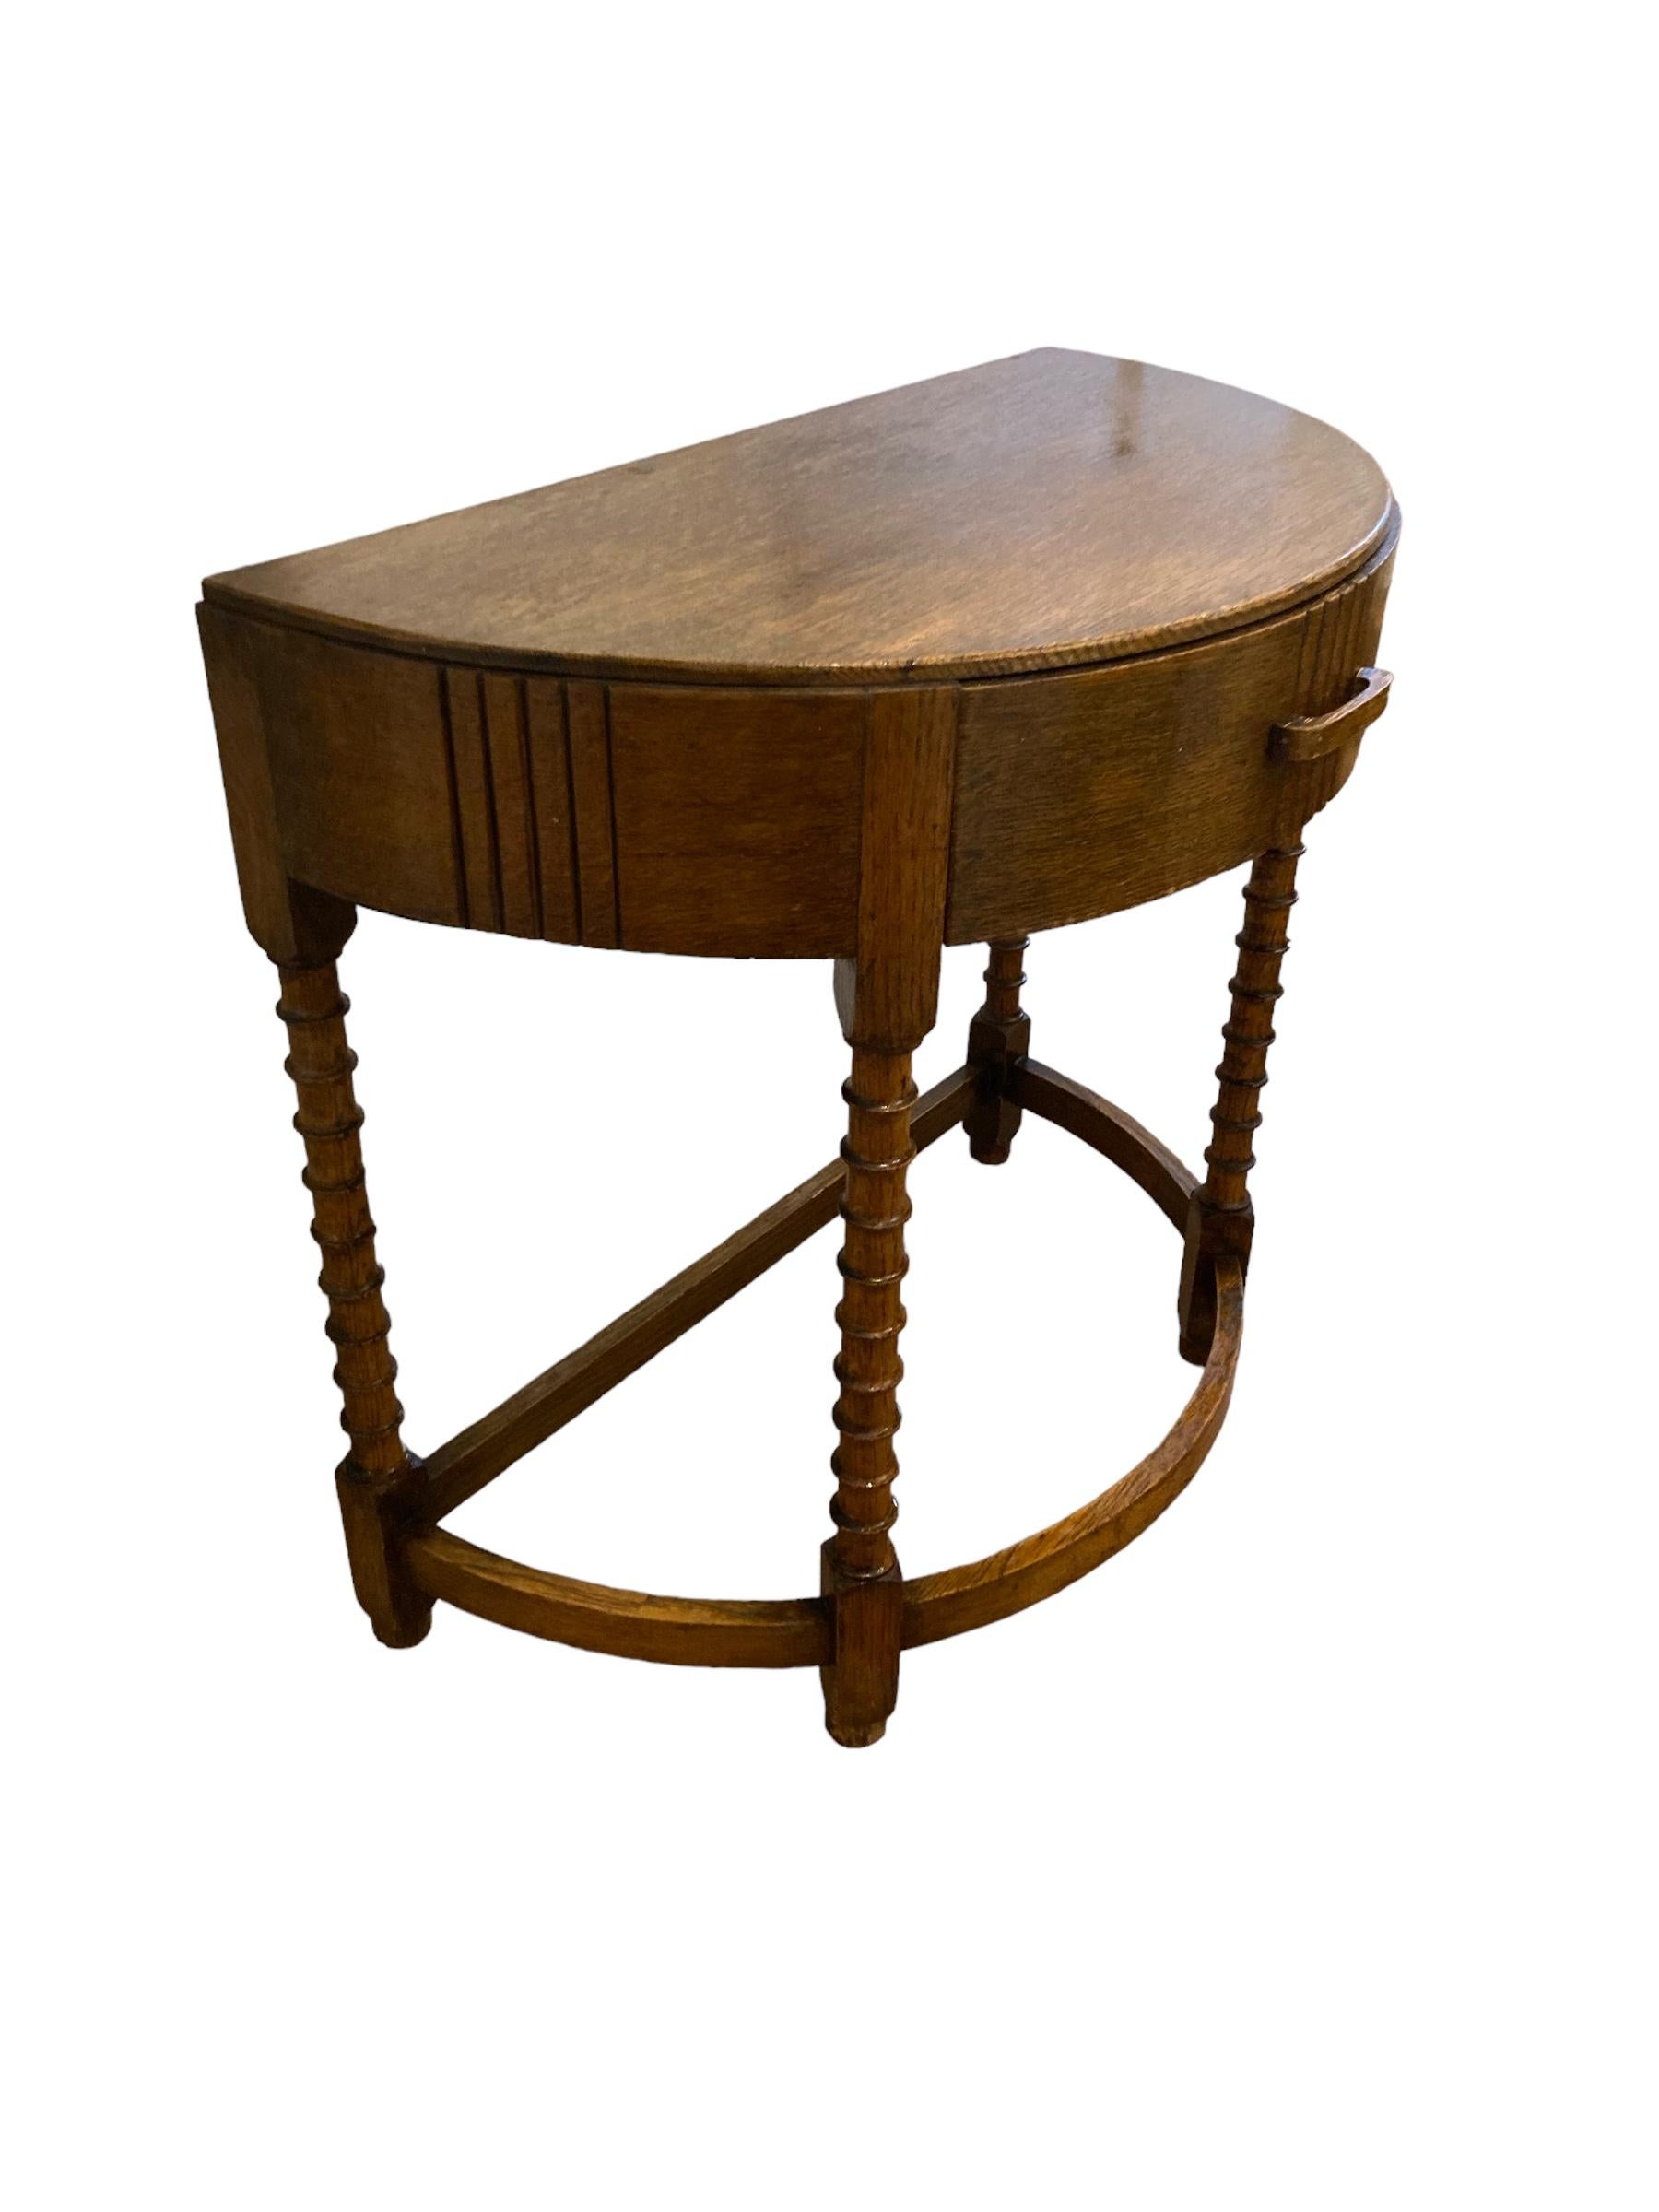 Introducing our elegant Art Deco Half Moon table with a beautifully crafted wooden top and four carved sturdy legs, curved stretcher and a single drawer, This versatile piece of furniture combines functionality with style, making it a perfect